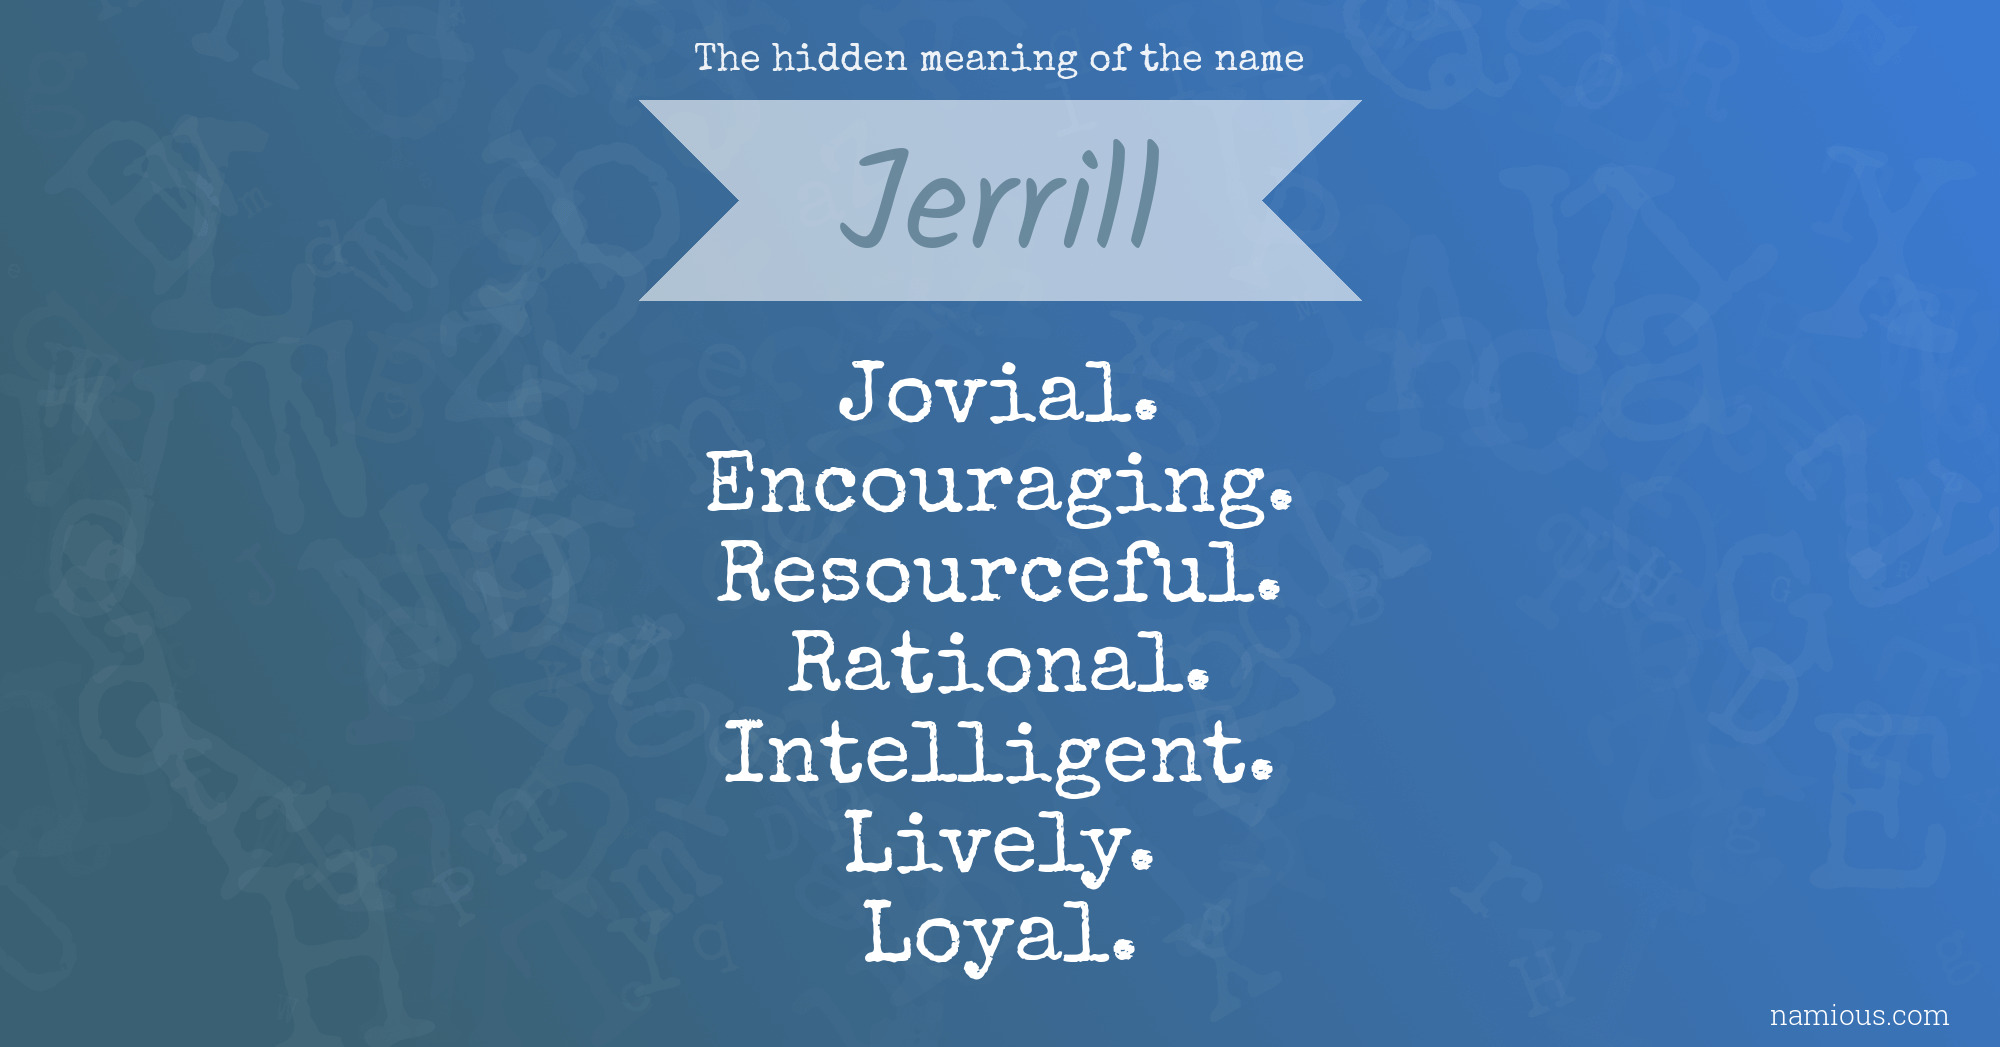 The hidden meaning of the name Jerrill